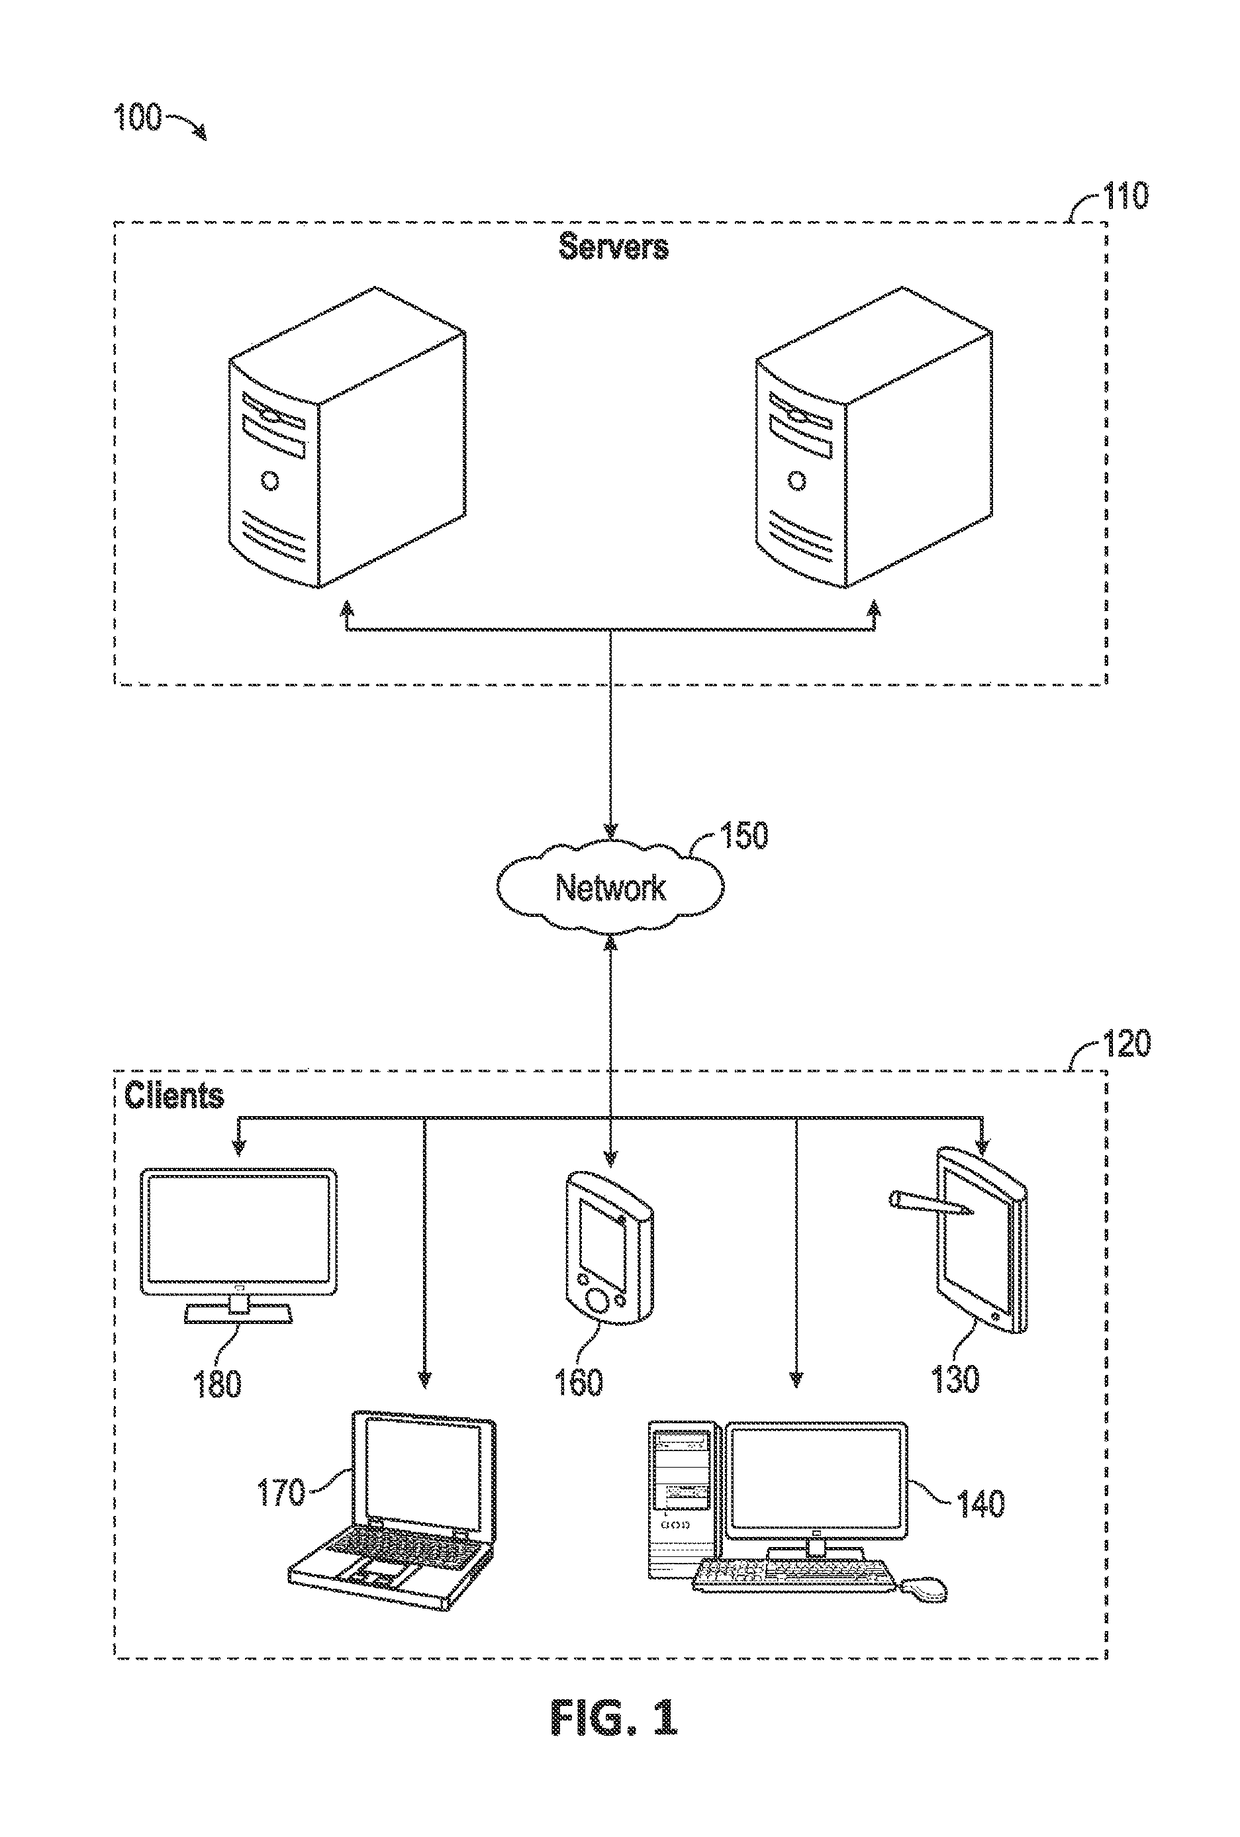 Operating system interface for credential management